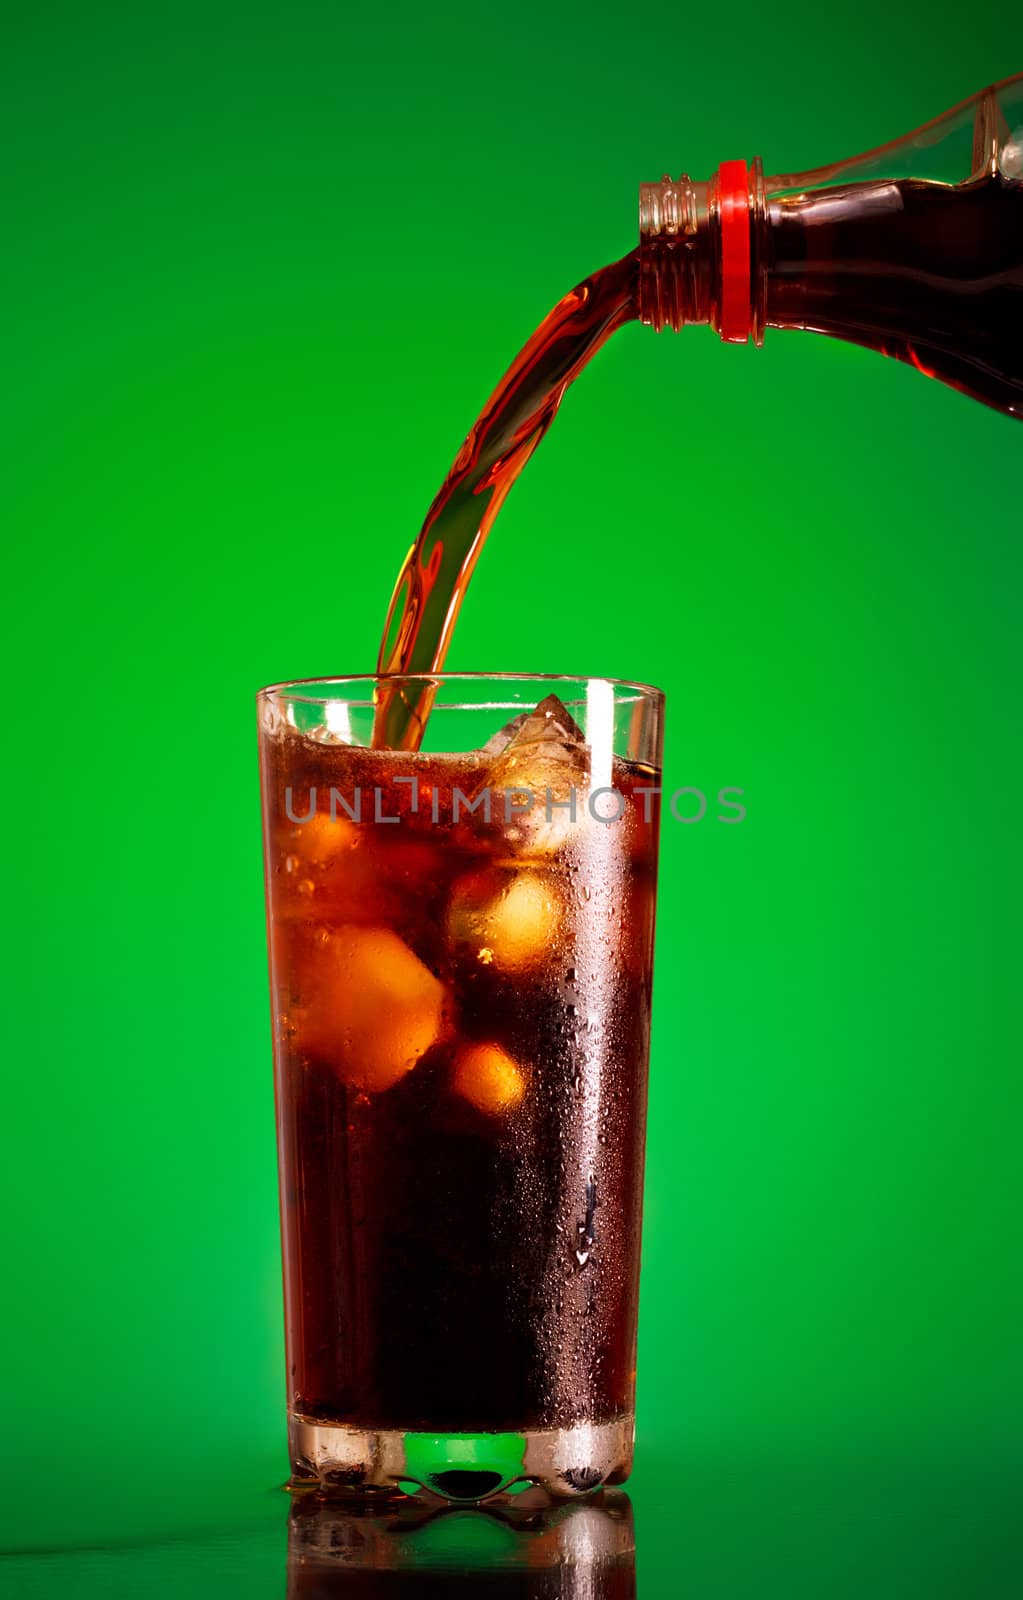 pouring cola in glass over green background